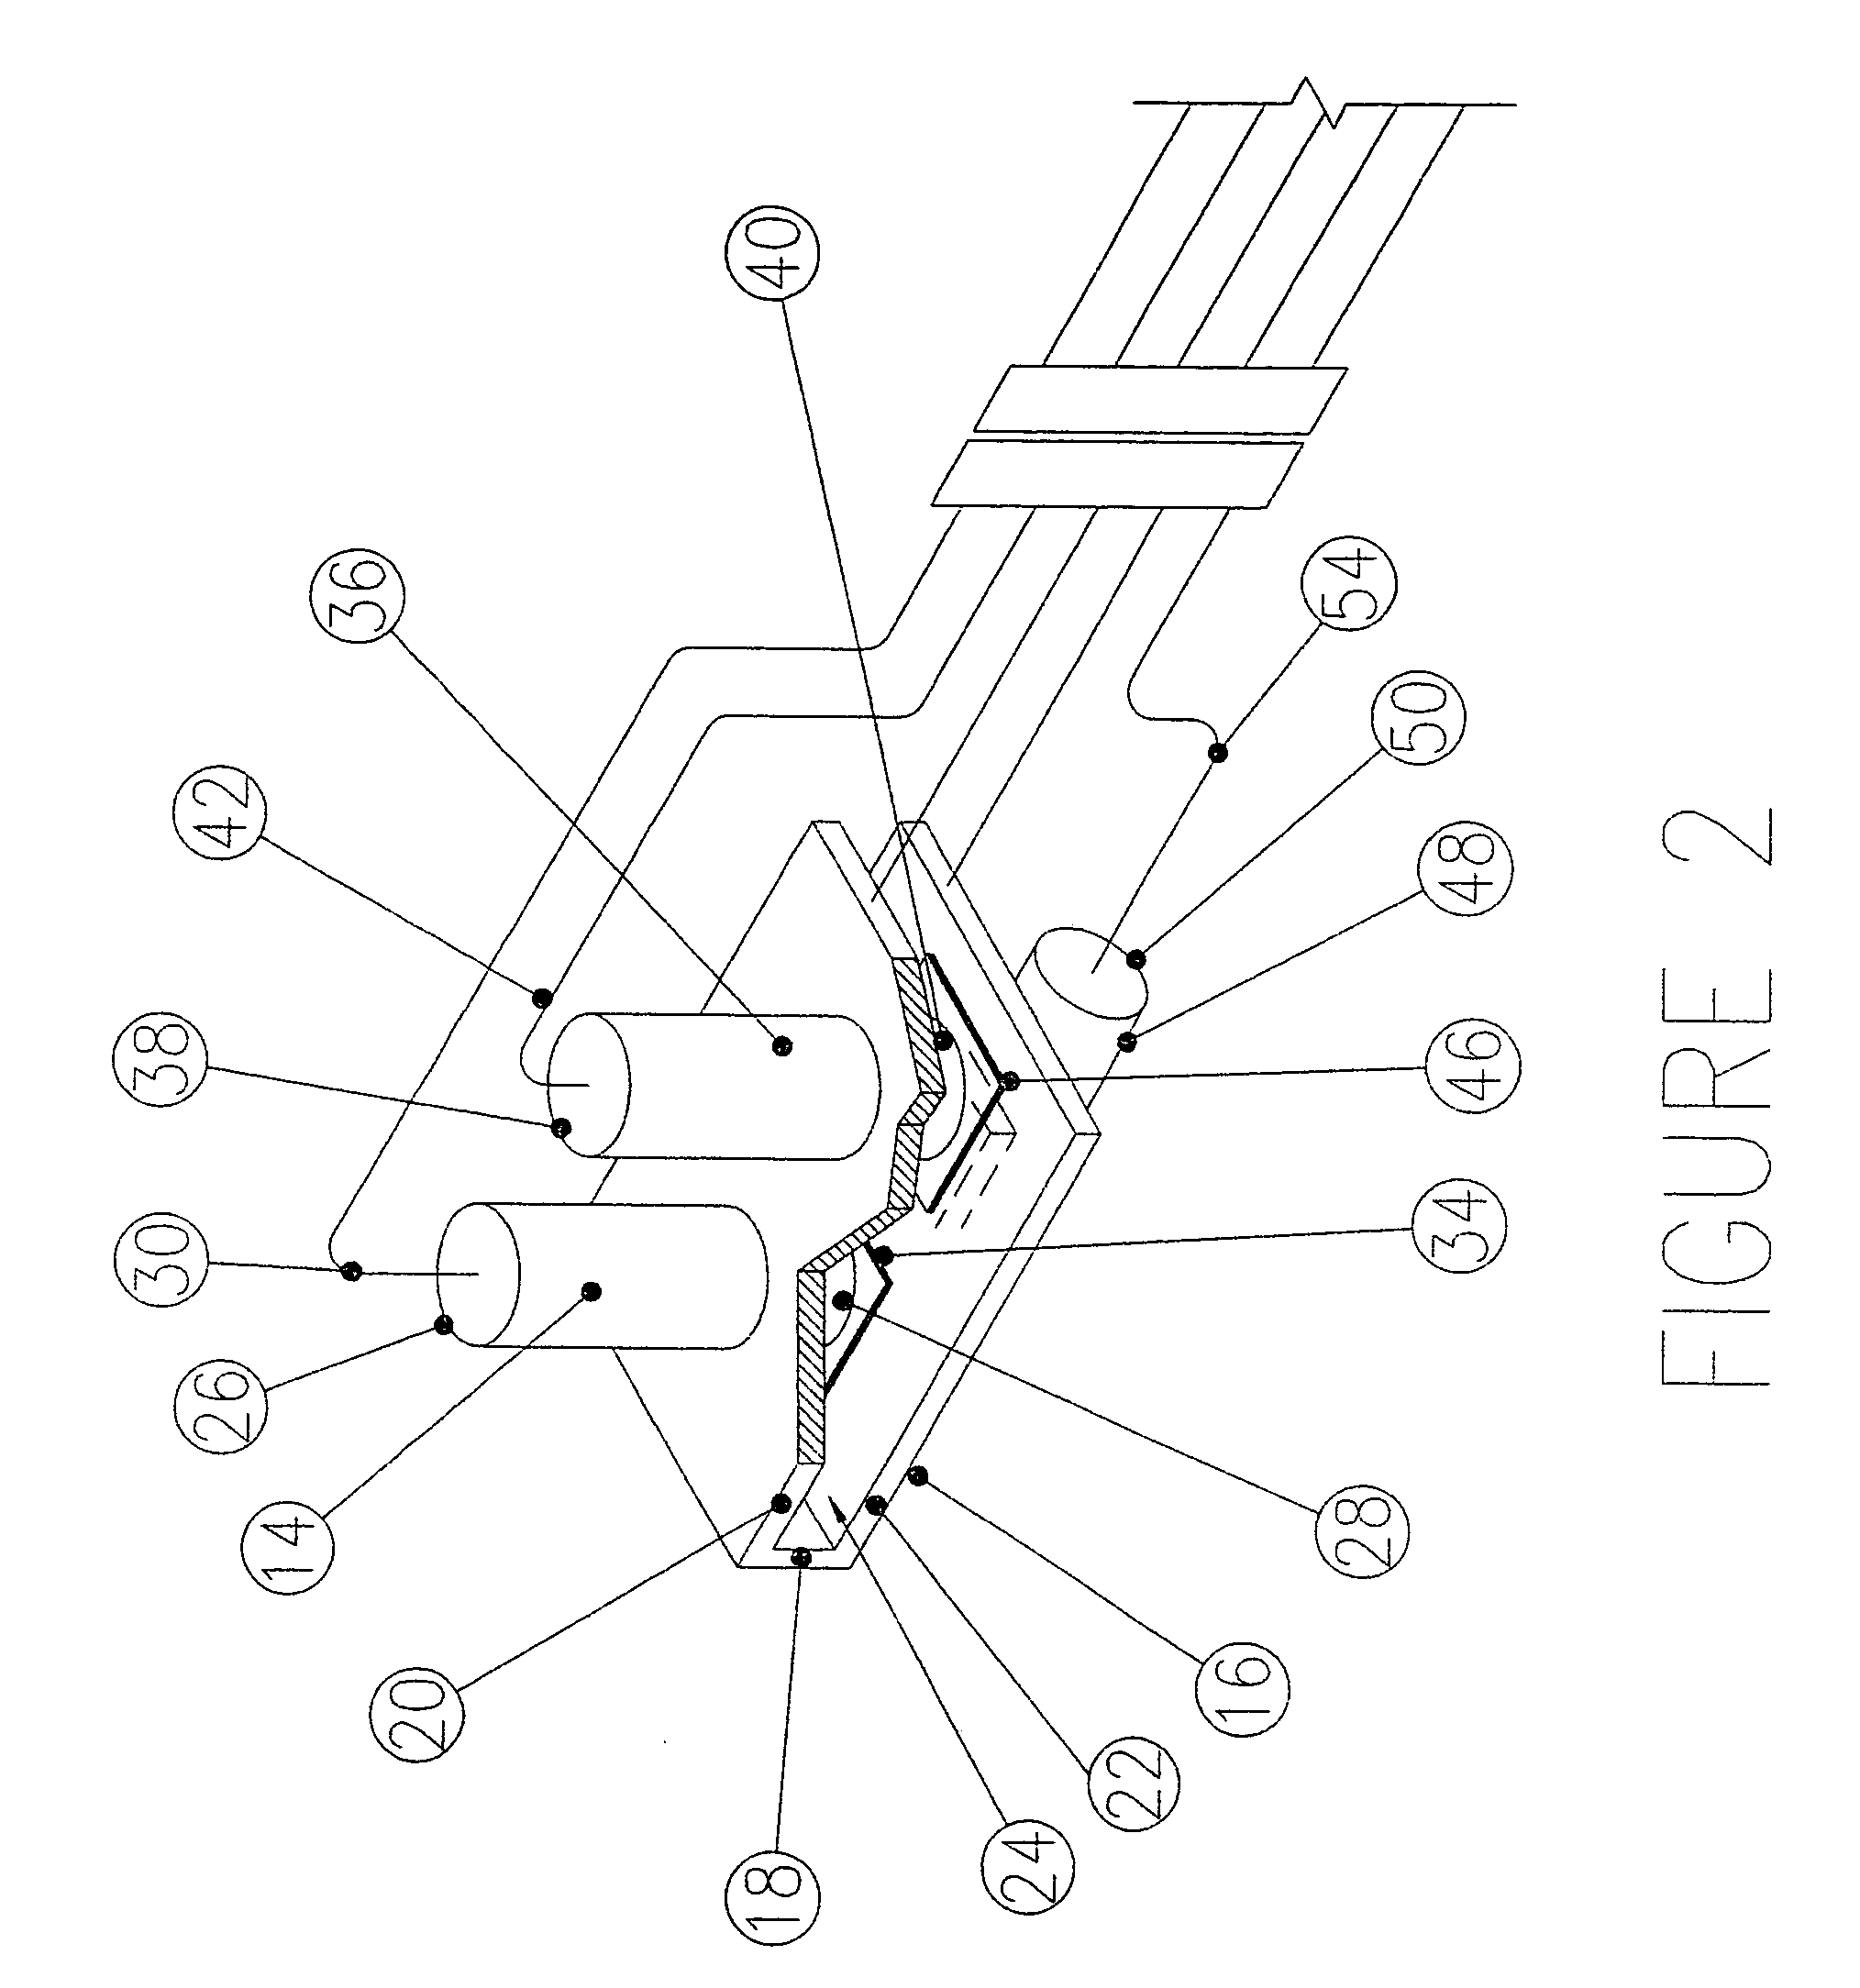 Method and apparatus for instrumental analysis in remote locations